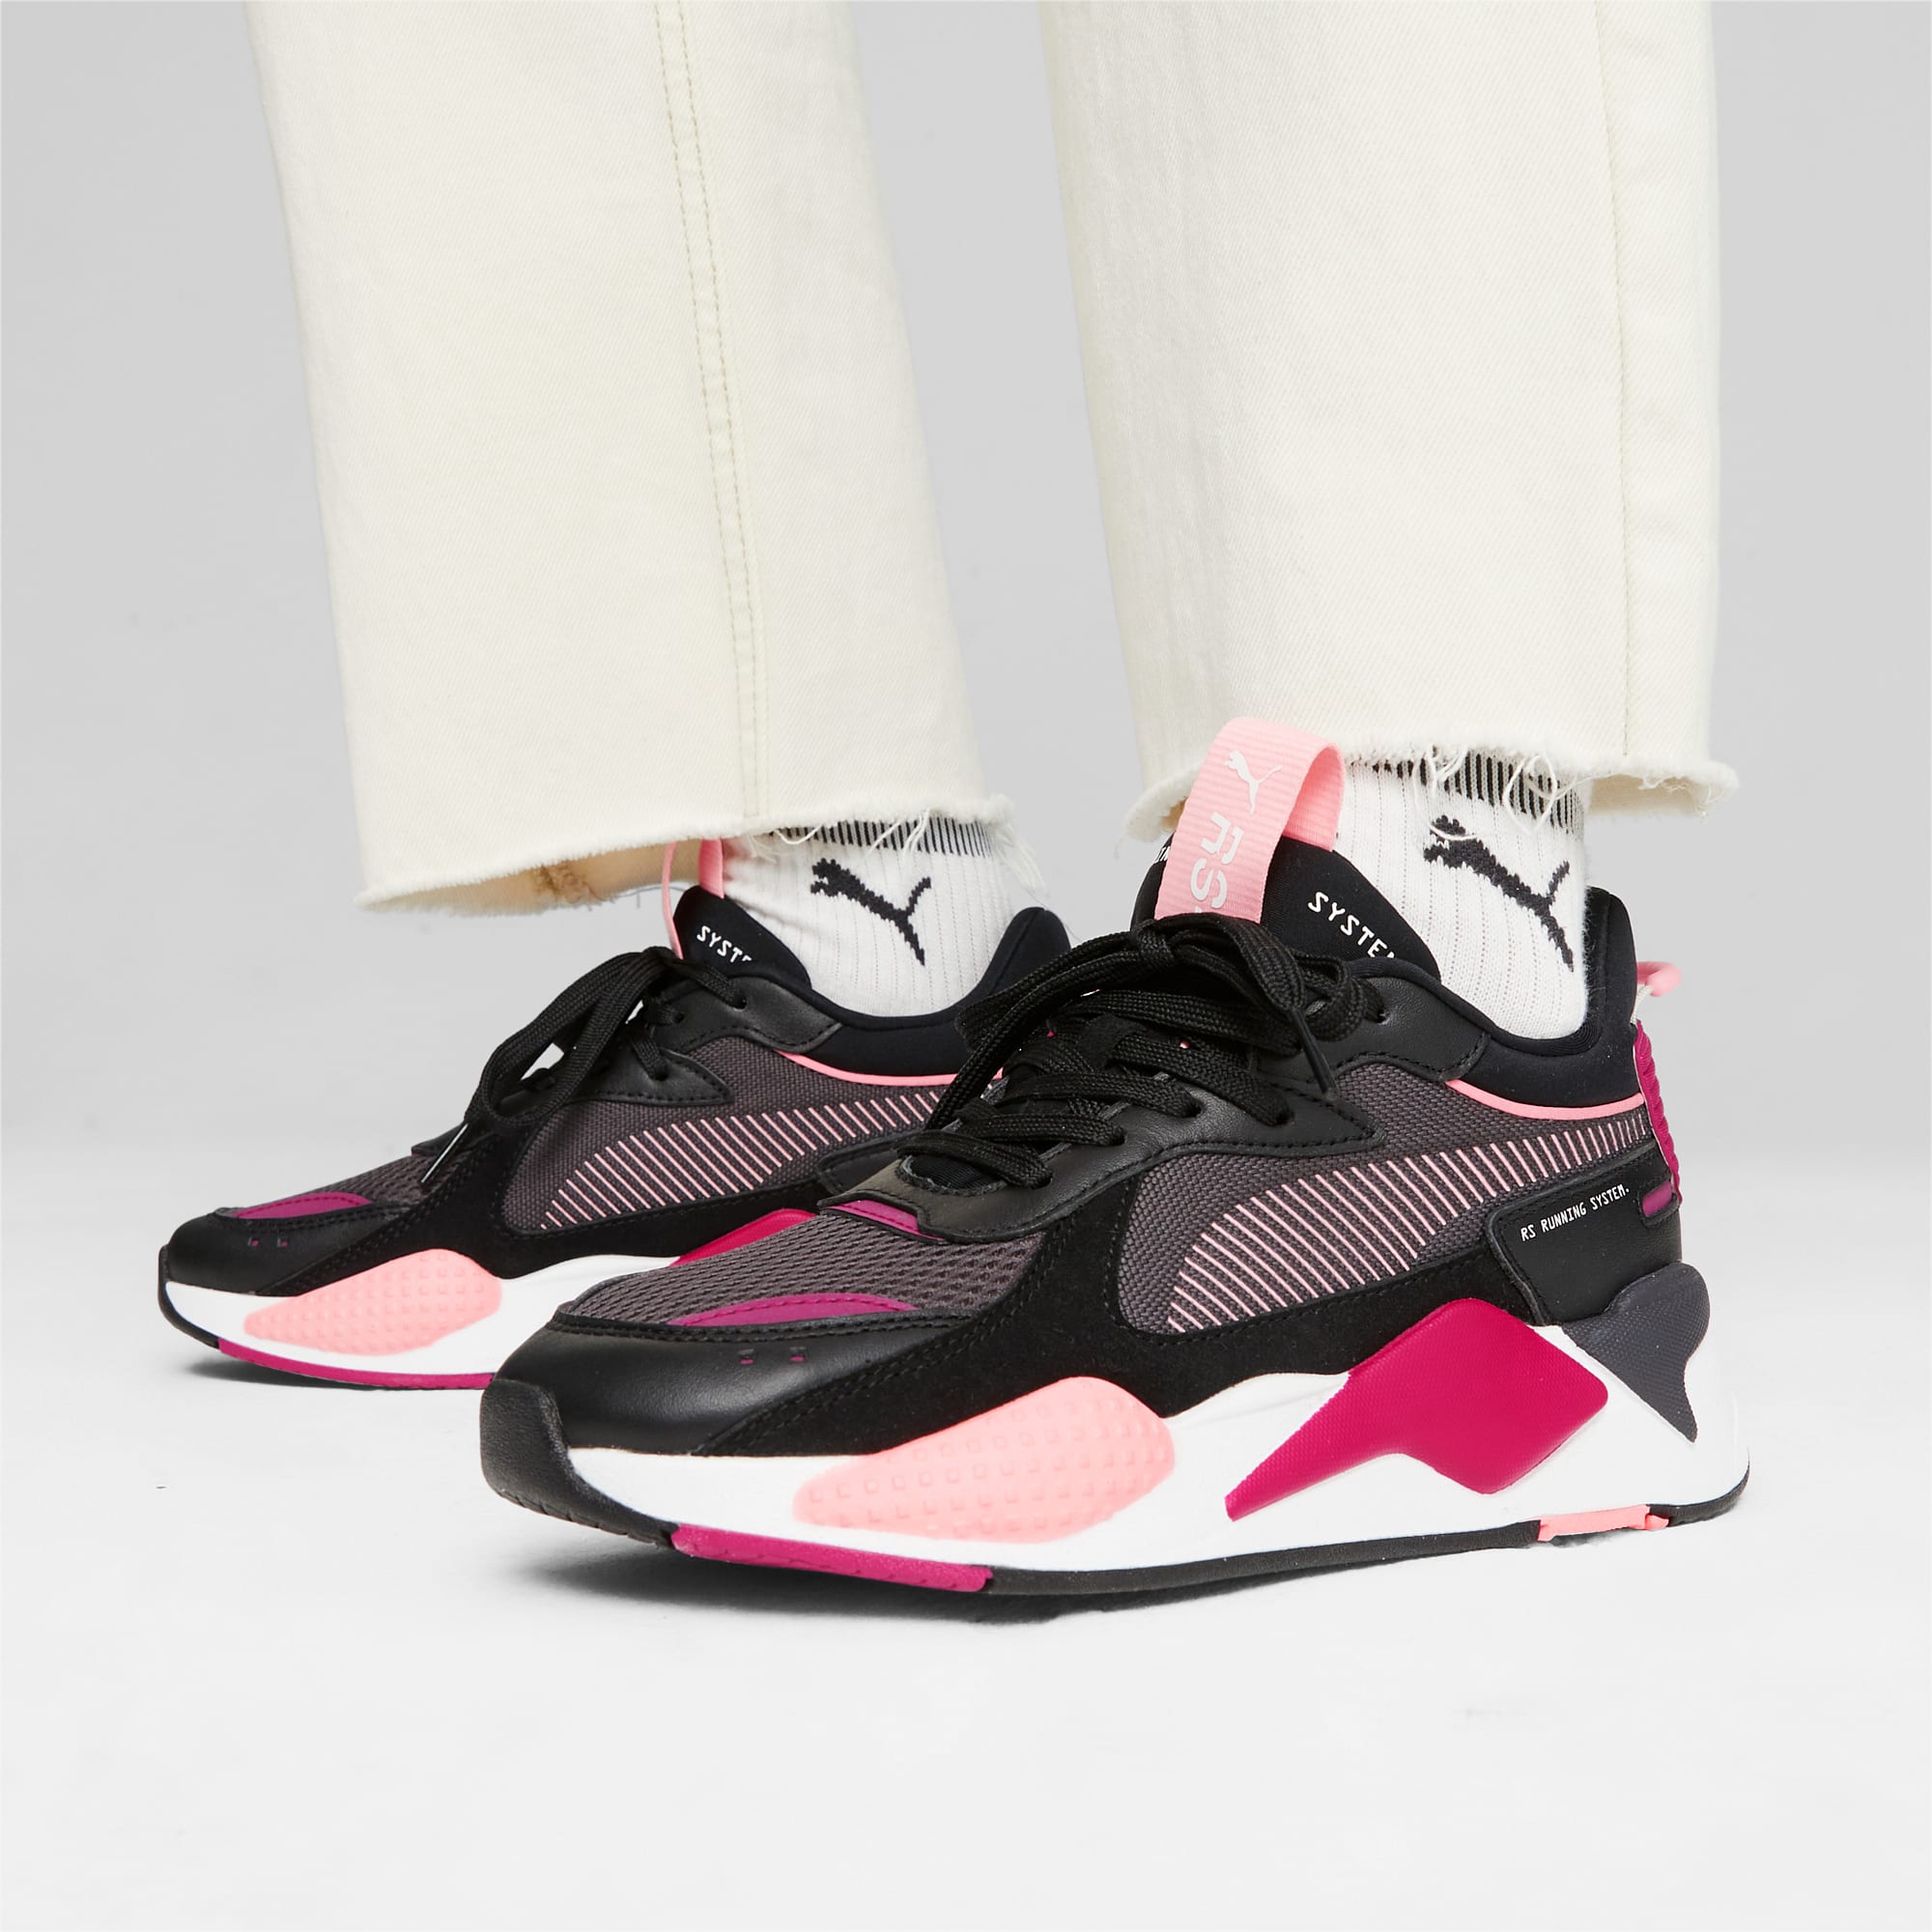 Women's PUMA Rs-X Reinvention Trainers, Dark Coal/Black, Size 35,5, Shoes